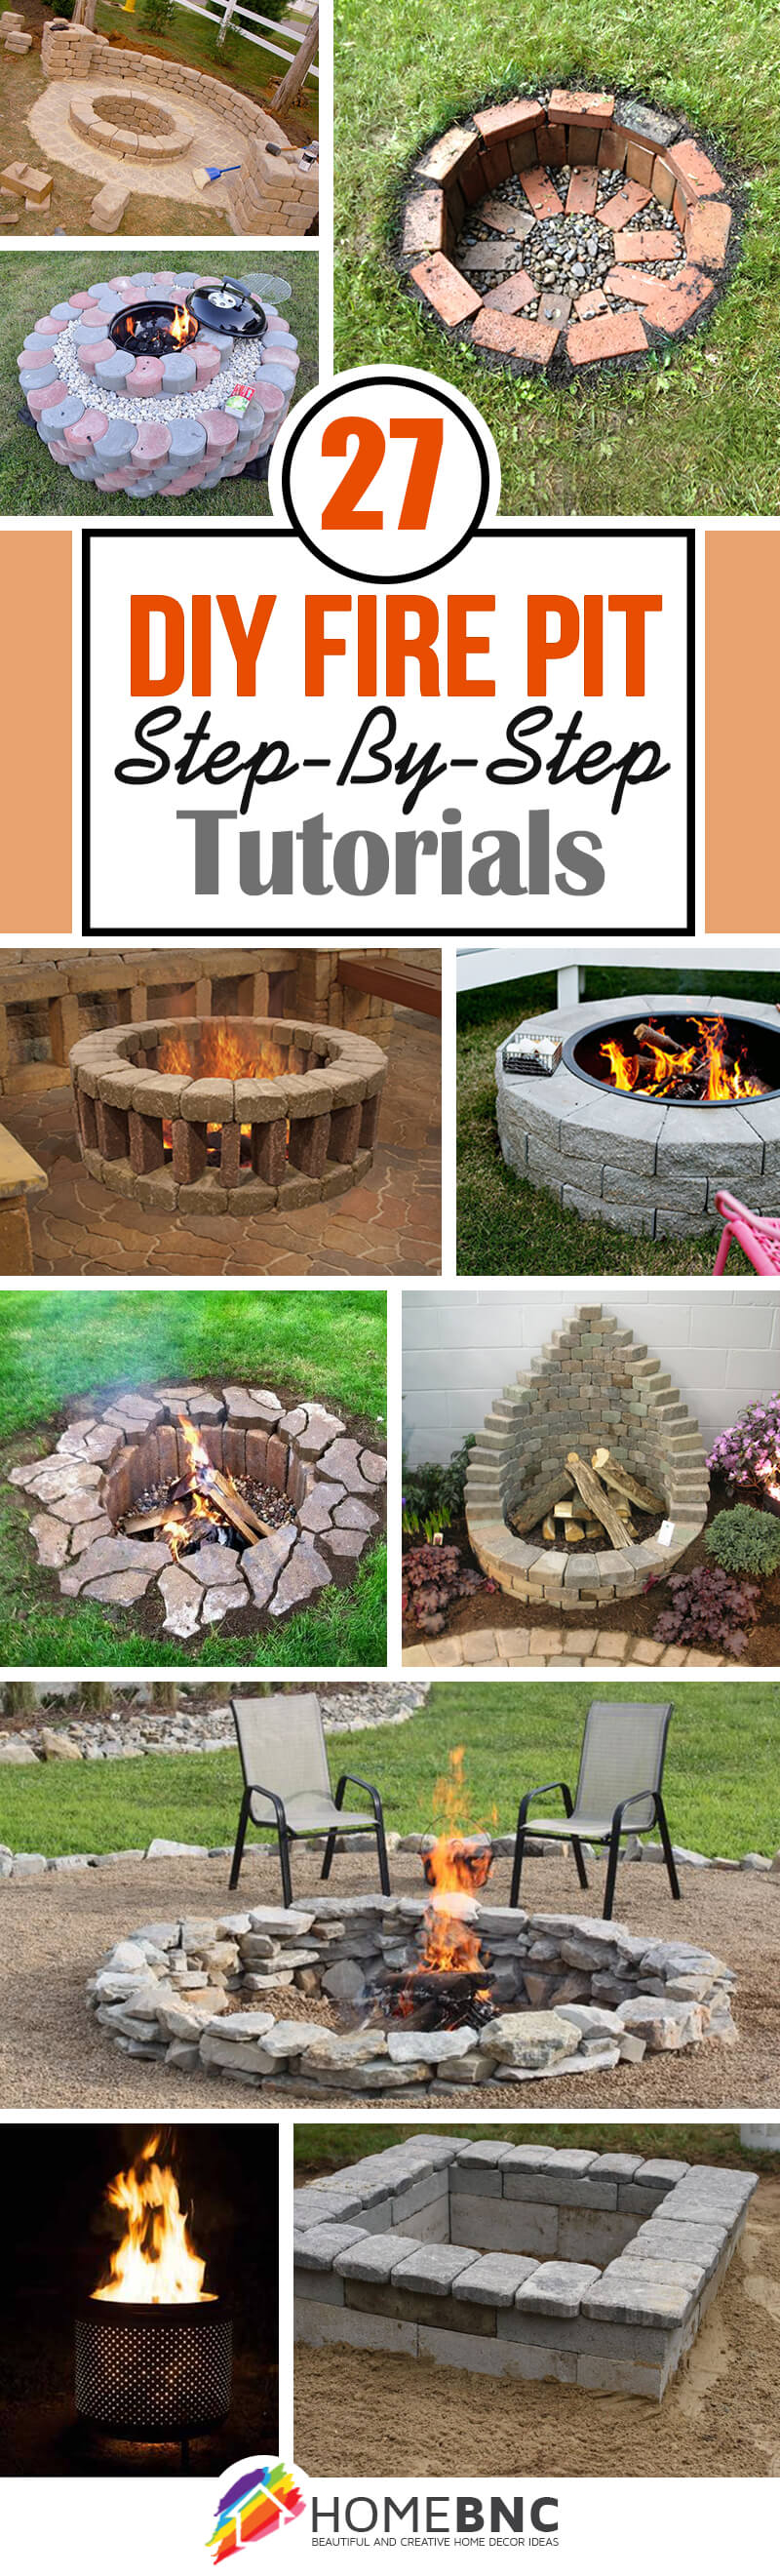 27 Best Diy Firepit Ideas And Designs, How To Build Fire Pit Area